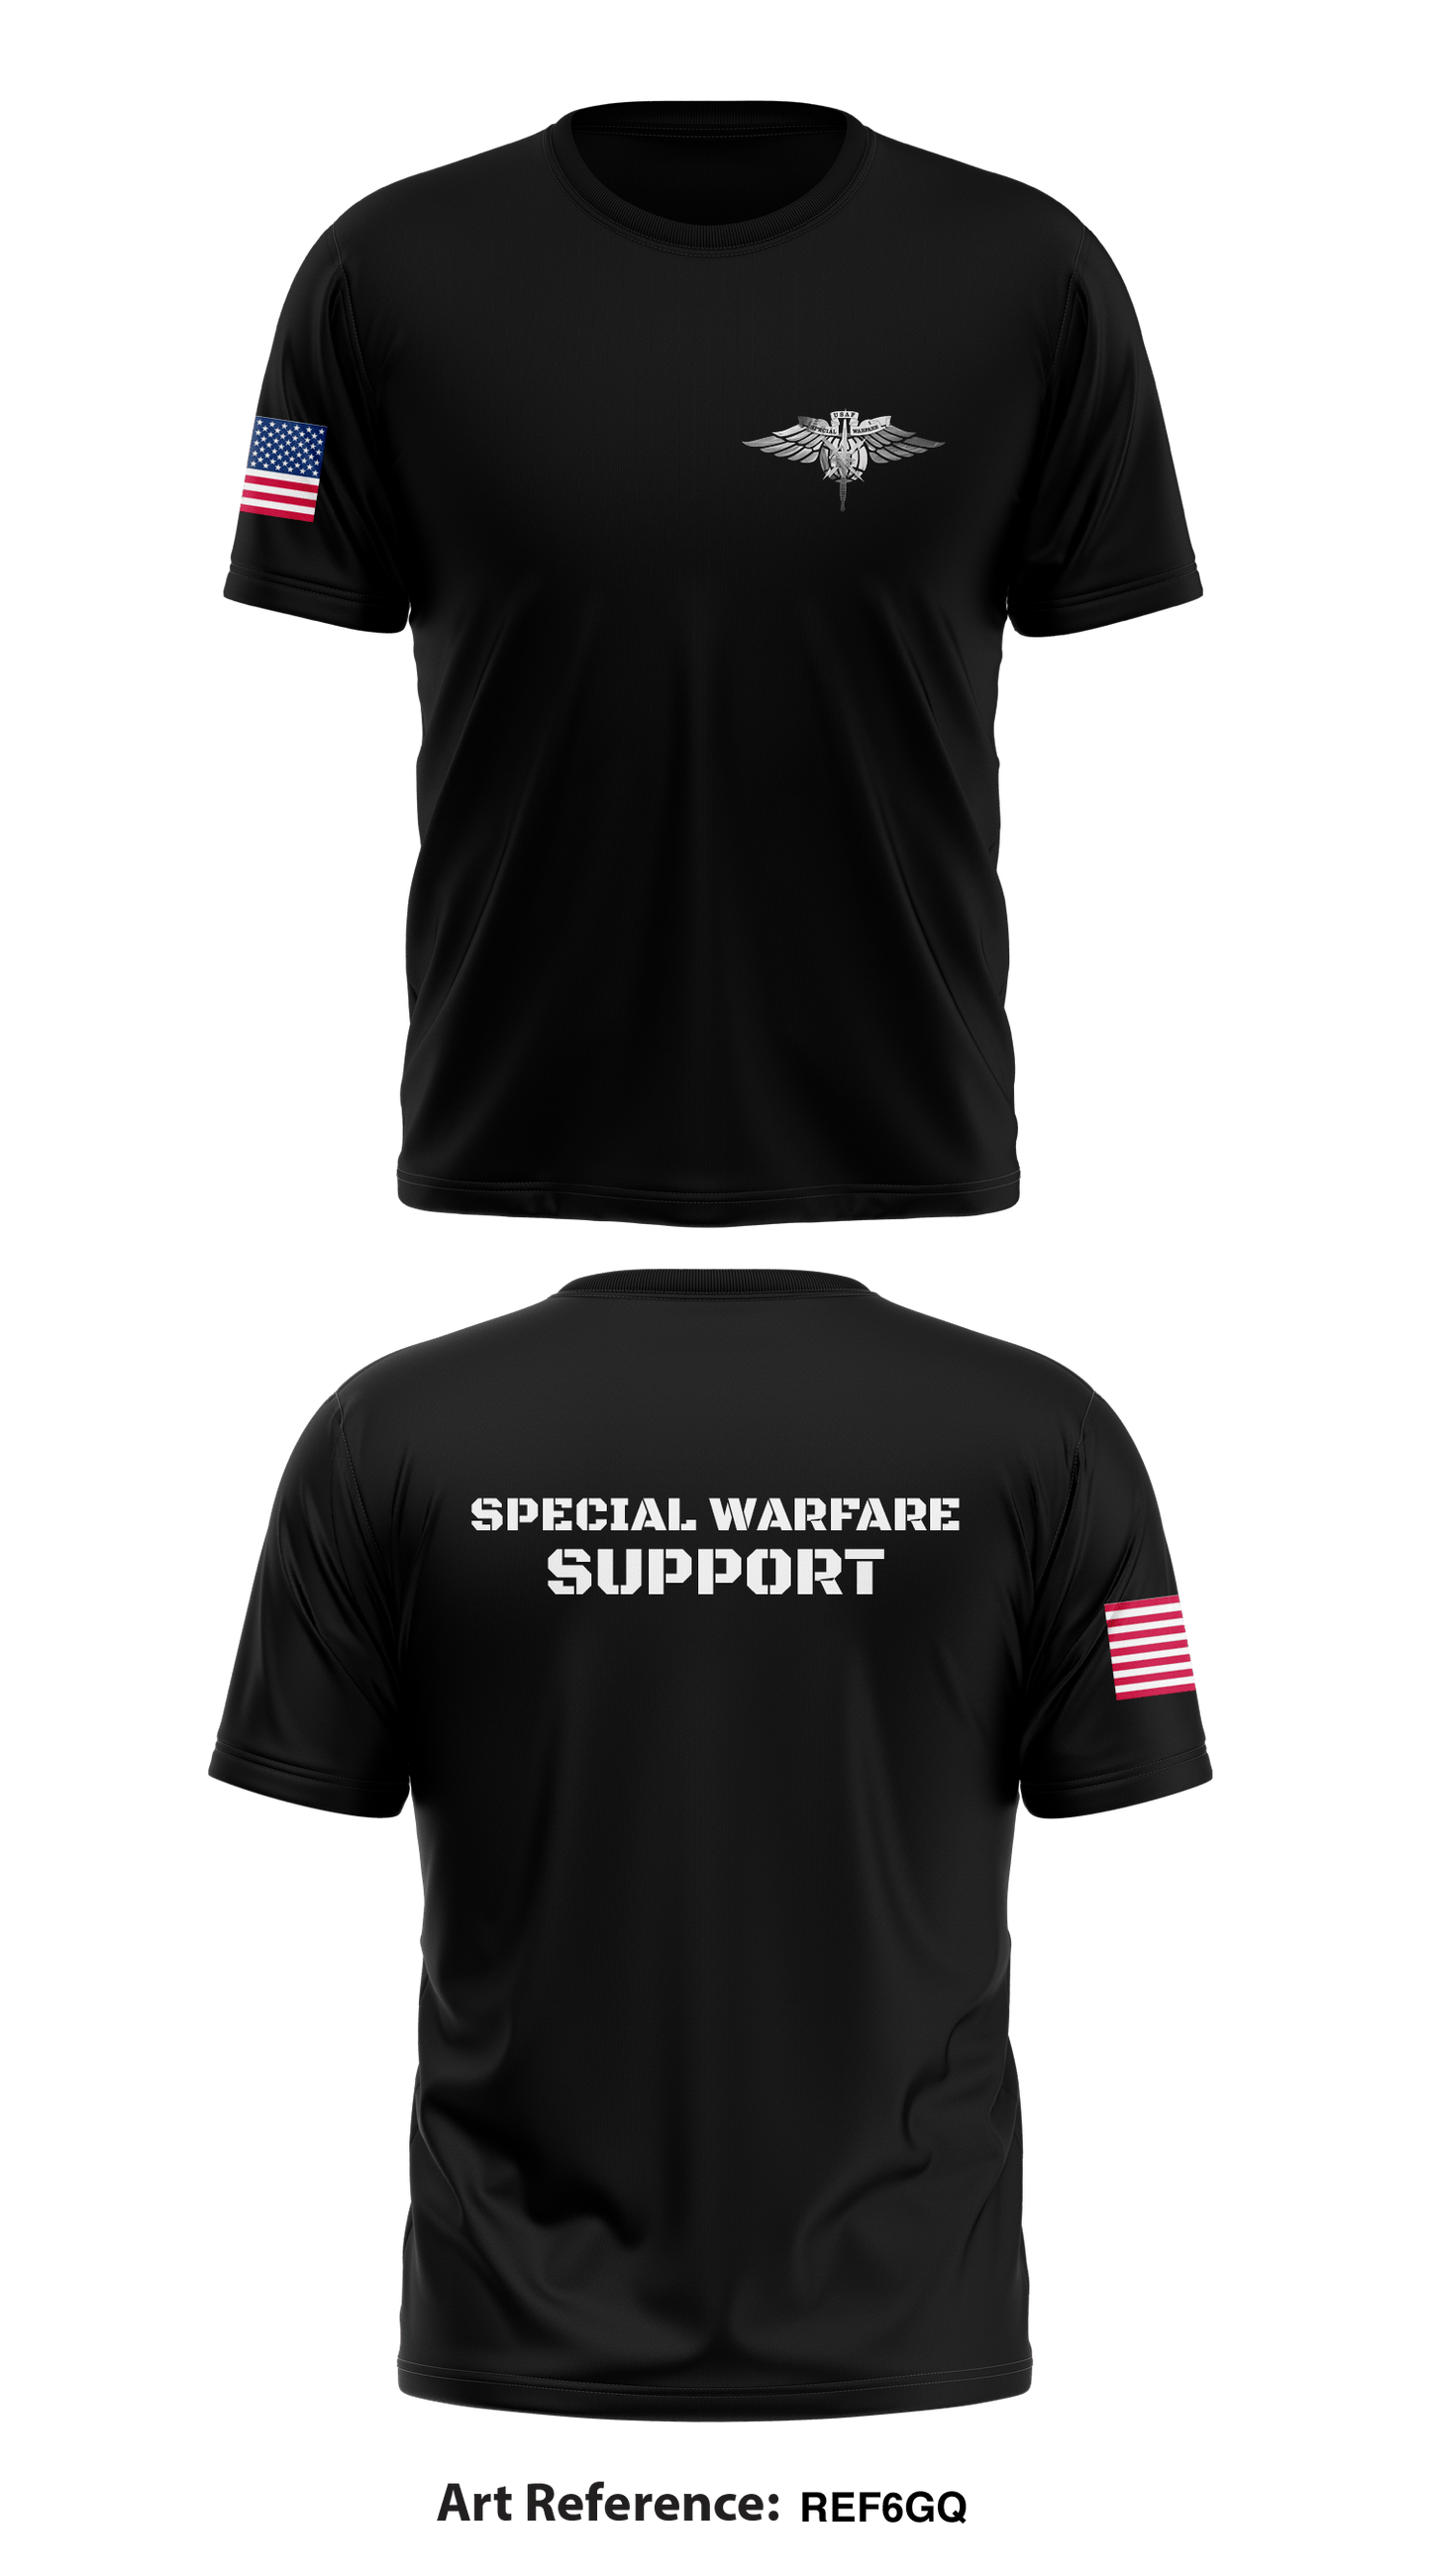 SPECIAL WARFARE SUPPORT Core Men's SS Performance Tee - ReF6GQ